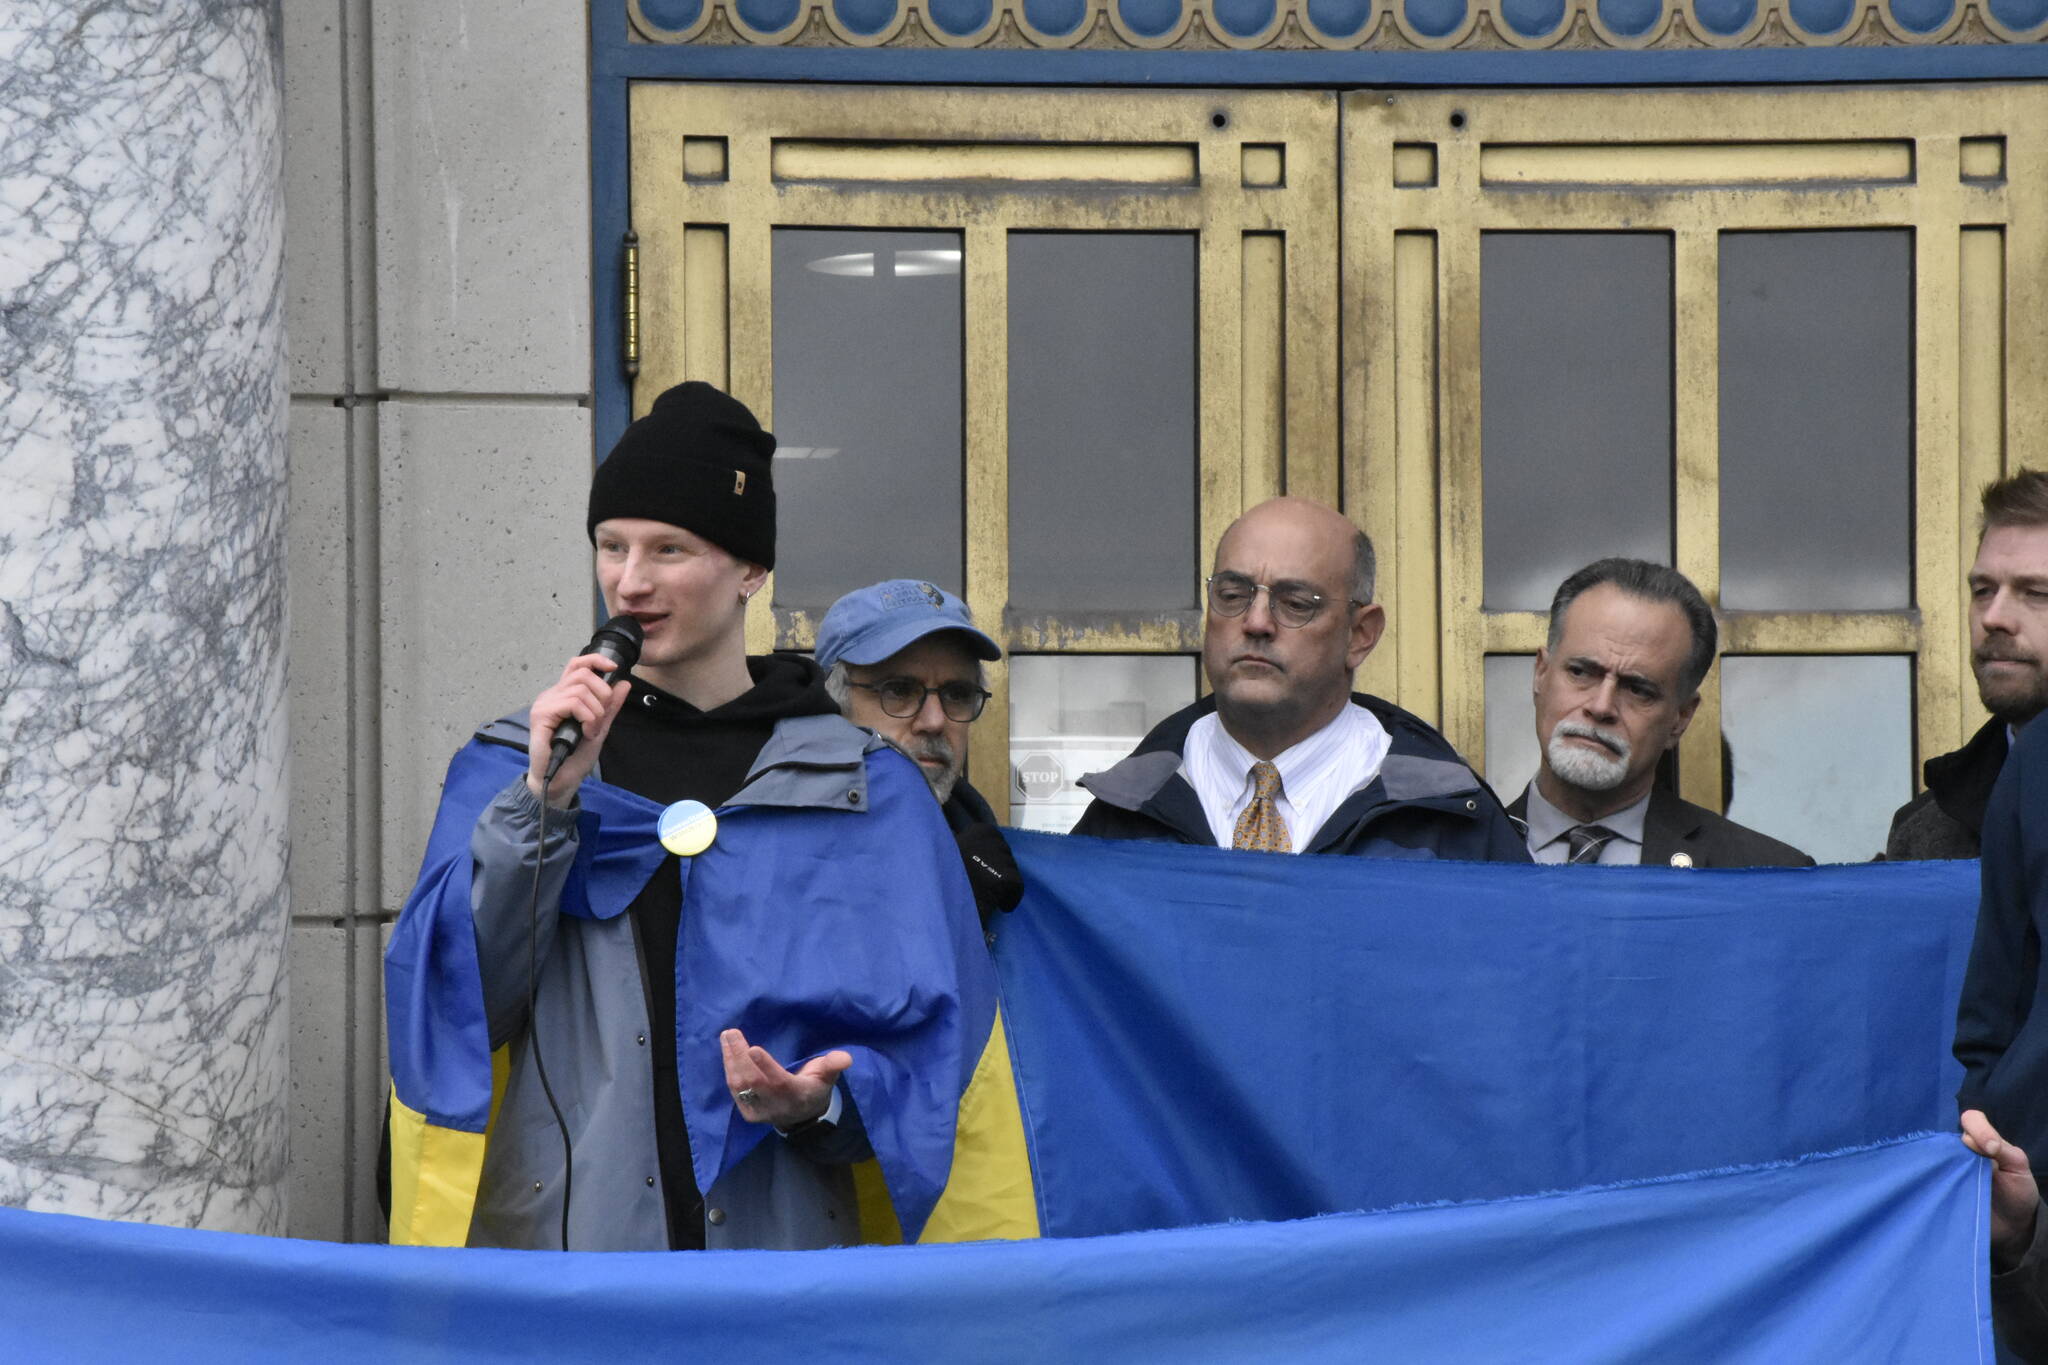 Peter Segall / Juneau Empire
Viktor Tkachenko, who recently moved to Alaska from Ukraine, speaks during a rally encouraging the state to divest itself from all Russian investment on March 4, 2022.